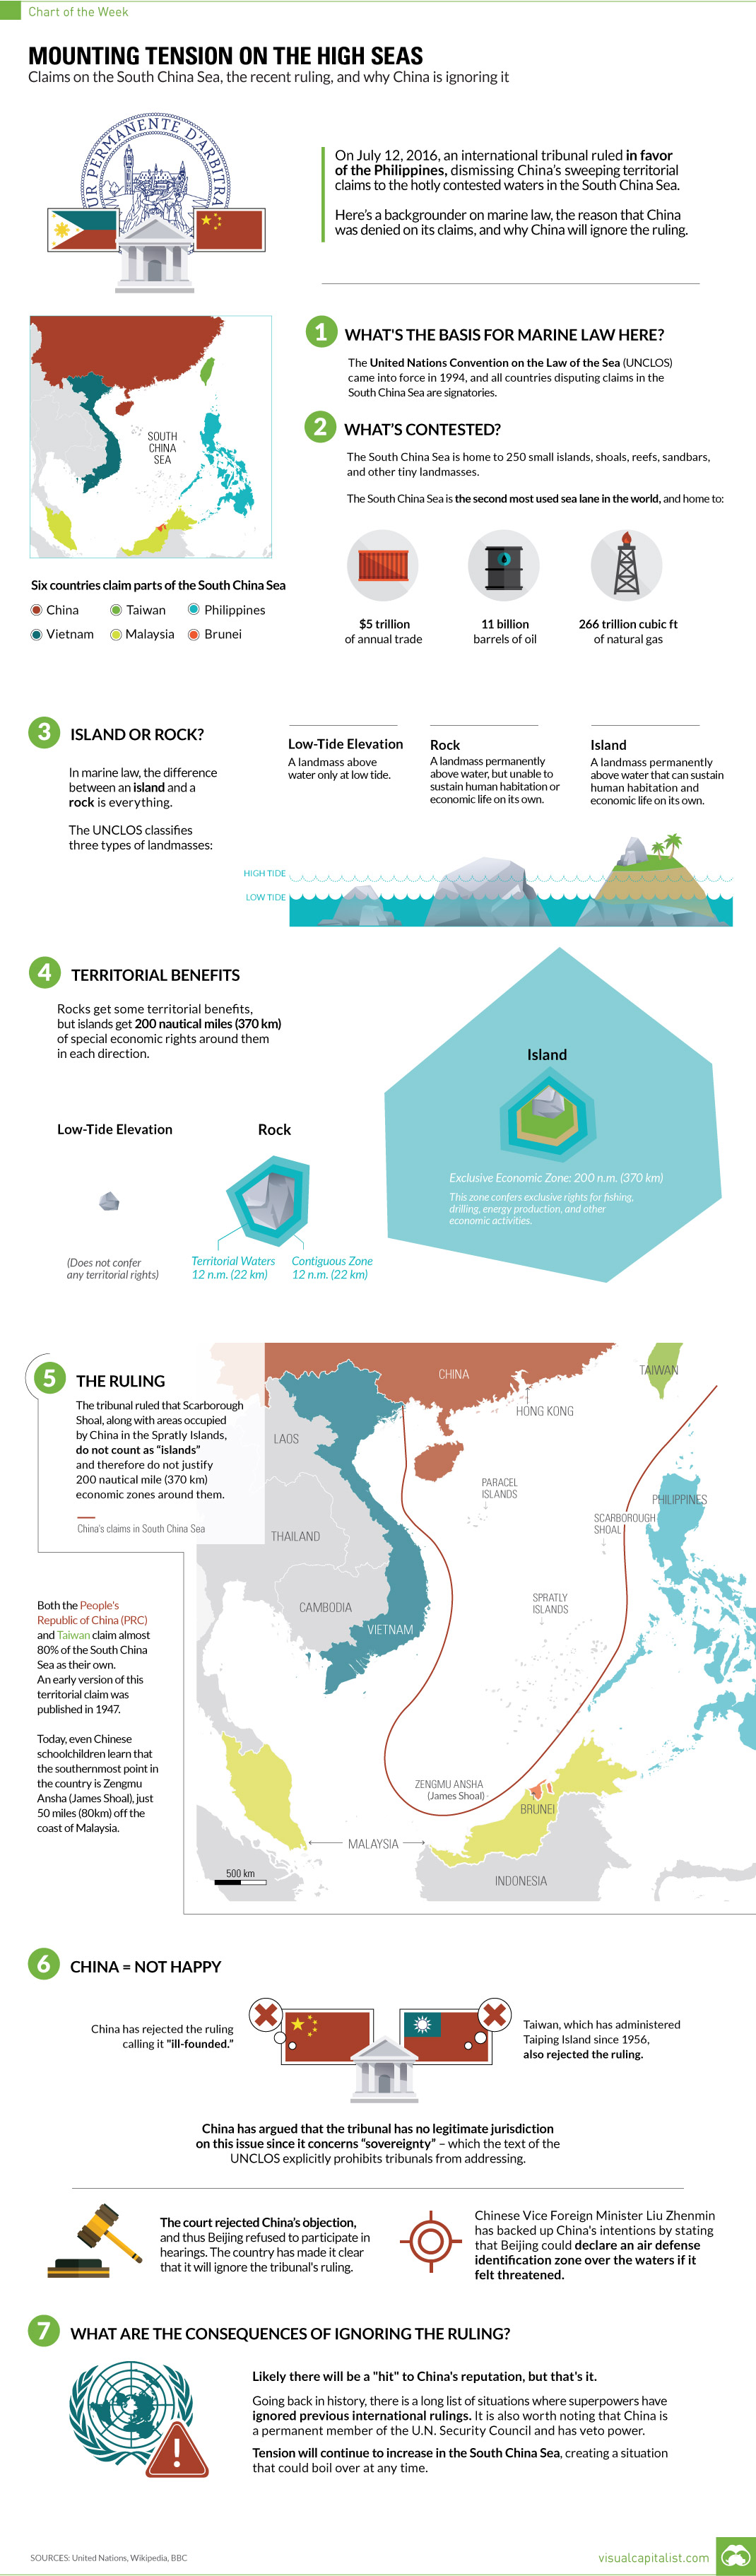 Explained by Graphics: Tension in the South China Sea